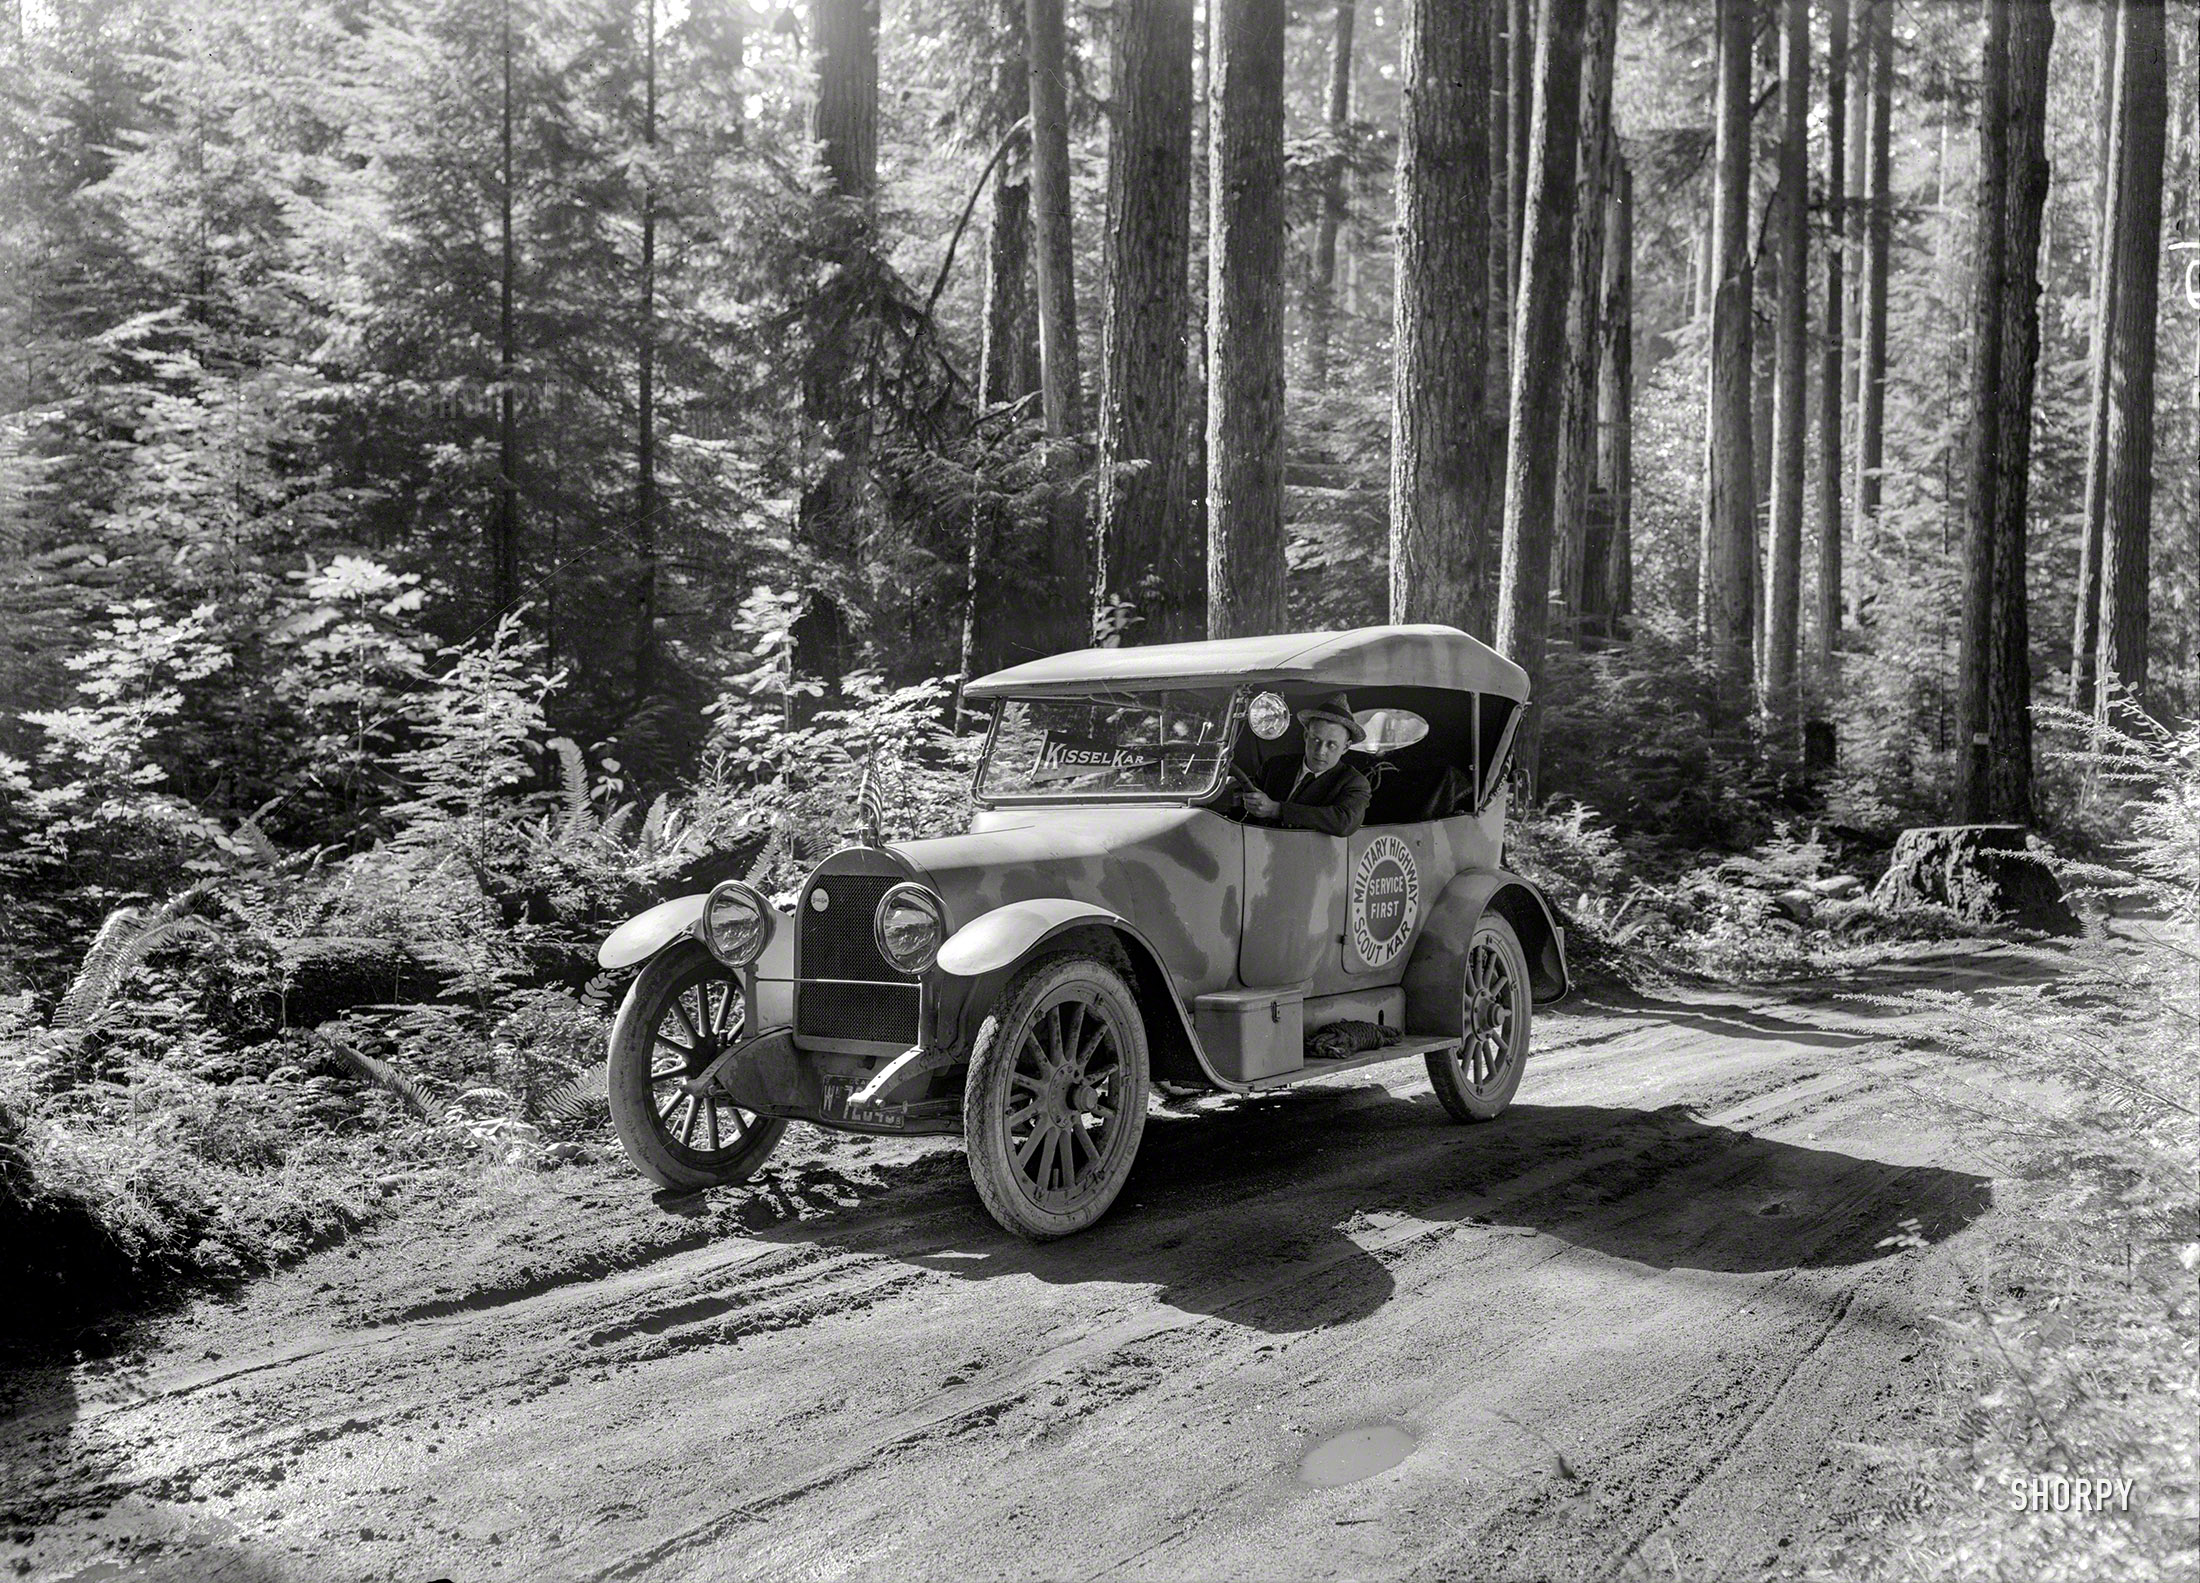 &nbsp; &nbsp; &nbsp; &nbsp; America's first camouflaged automobile has been let loose, and is now on the war path. The inhabitants of the Pacific Coast from Seattle to San Diego swear they are "seeing things." A sheriff who has a record for pinching speeders is out after the camoufleurs who committed "camouflage" to prove that America's automobiles are as chameleon-like while on the war path as those in Europe.
-- Oakland Tribune, Oct. 28, 1917

&nbsp; &nbsp; &nbsp; &nbsp; W.L. Hughson, of KisselKar fame upon the Pacific Coast, has donated the famous Kissel military scout car, recently used to blaze the "three nation run," to the government department having the new operations of "camouflage" in its charge. A committee of three prominent San Francisco artists will paint this car with color patches, which suggests nothing except the surrounding earth, trees, grain fields, sky, etc., making an exact fac-simile of the cars now being used by the allies along the various war fronts
-- Motor West, Oct. 15, 1917
"Kissel Military Highway Scout Kar." From somewhere in the woodsy Pacific Northwest comes the "Scout Kar" last seen here, with 1918 Washington State dealer plates. 5x7 glass negative by Christopher Helin. View full size.